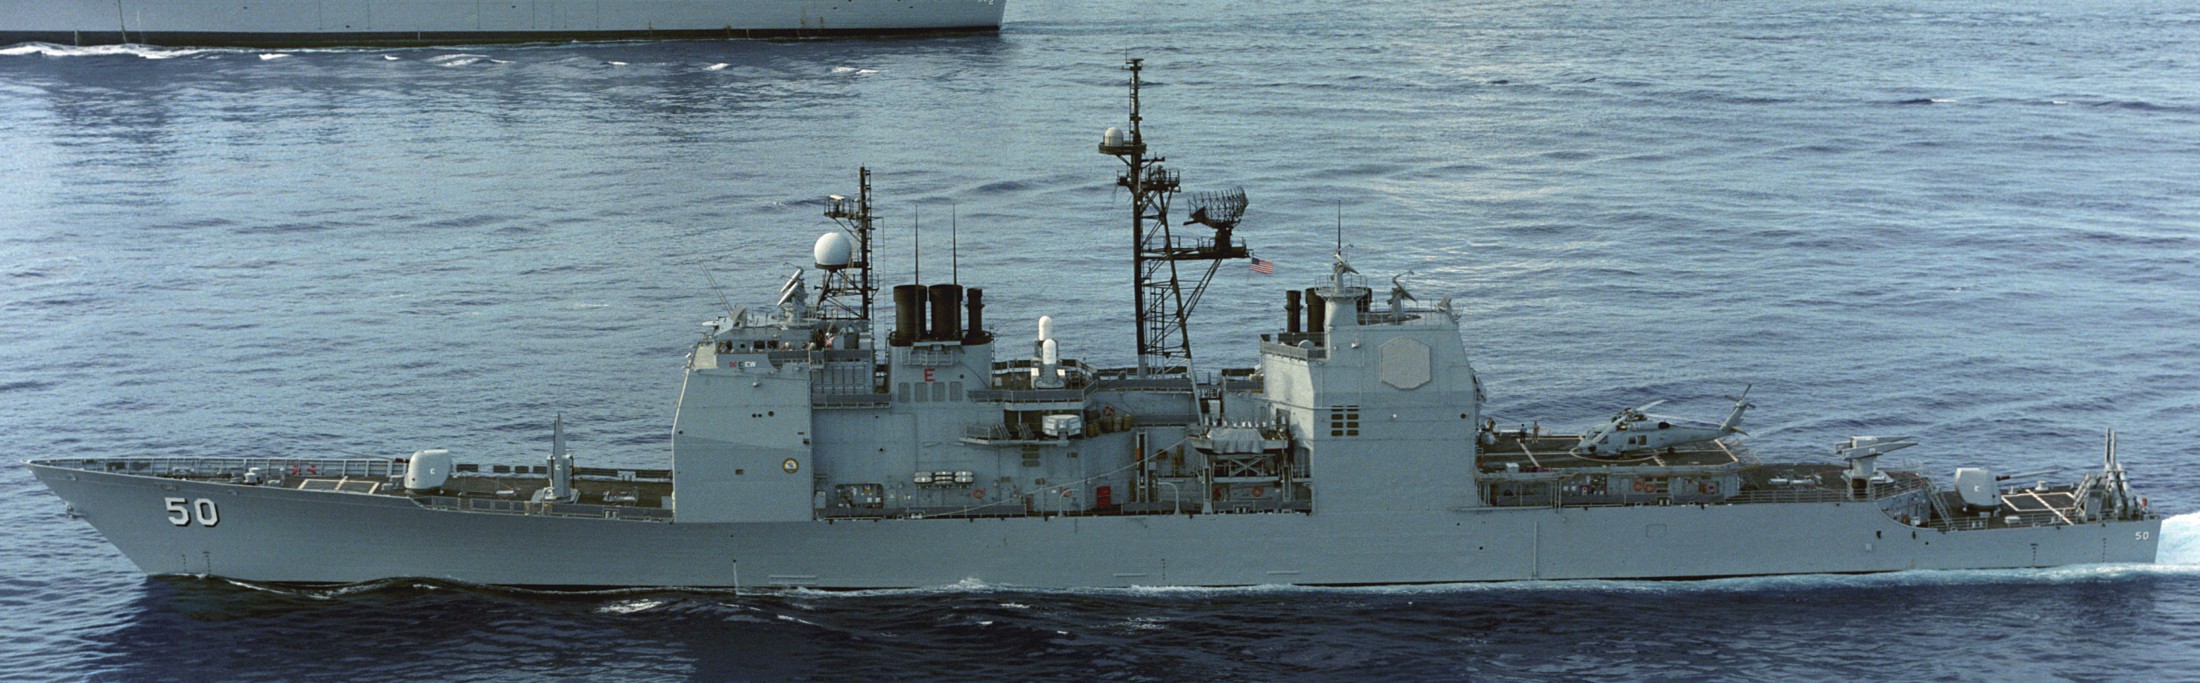 cg-50 uss valley forge ticonderoga class guided missile cruiser aegis us navy 39